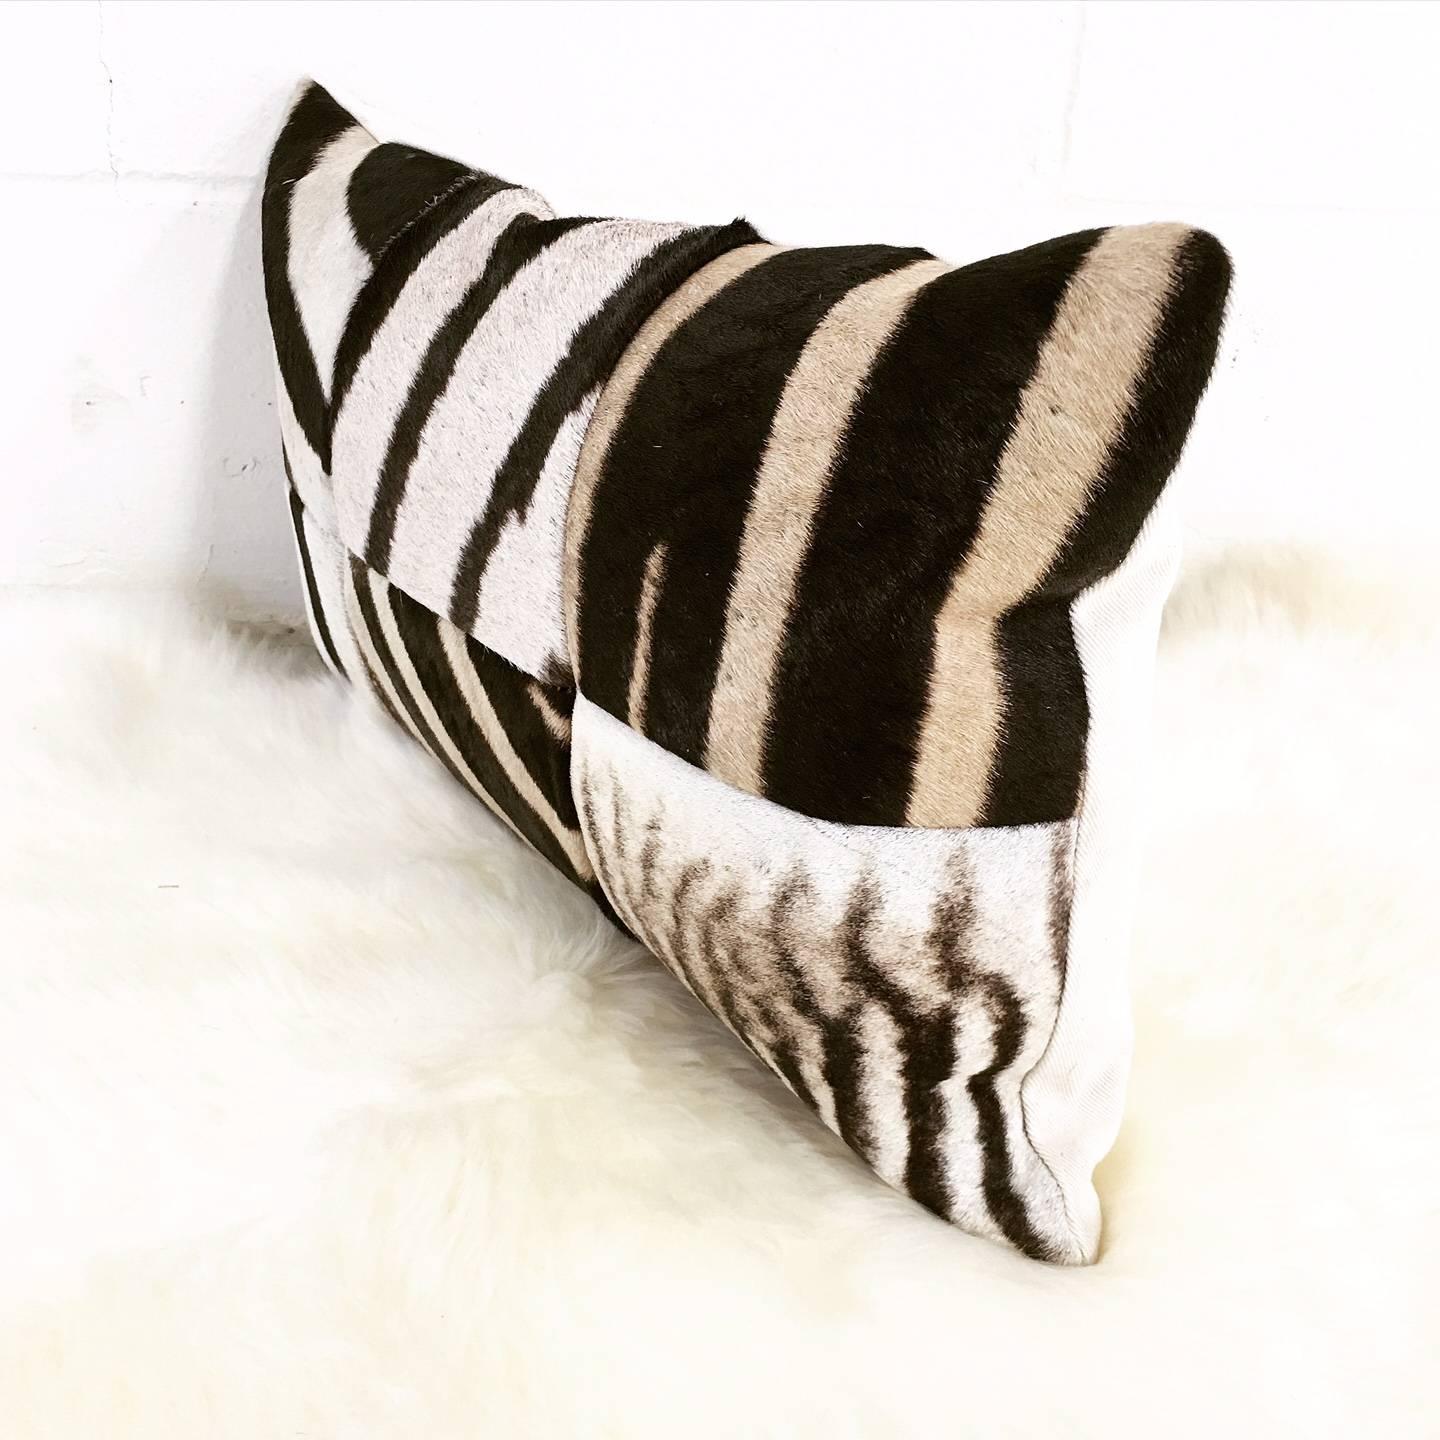 Forsyth zebra hide pillows are simply the best. The most beautiful hides are selected and hand-cut, hand-stitched and hand-stuffed with the finest goose down. Each step is meticulously curated by Saint Louis based Forsyth artisans. Every pillow is a